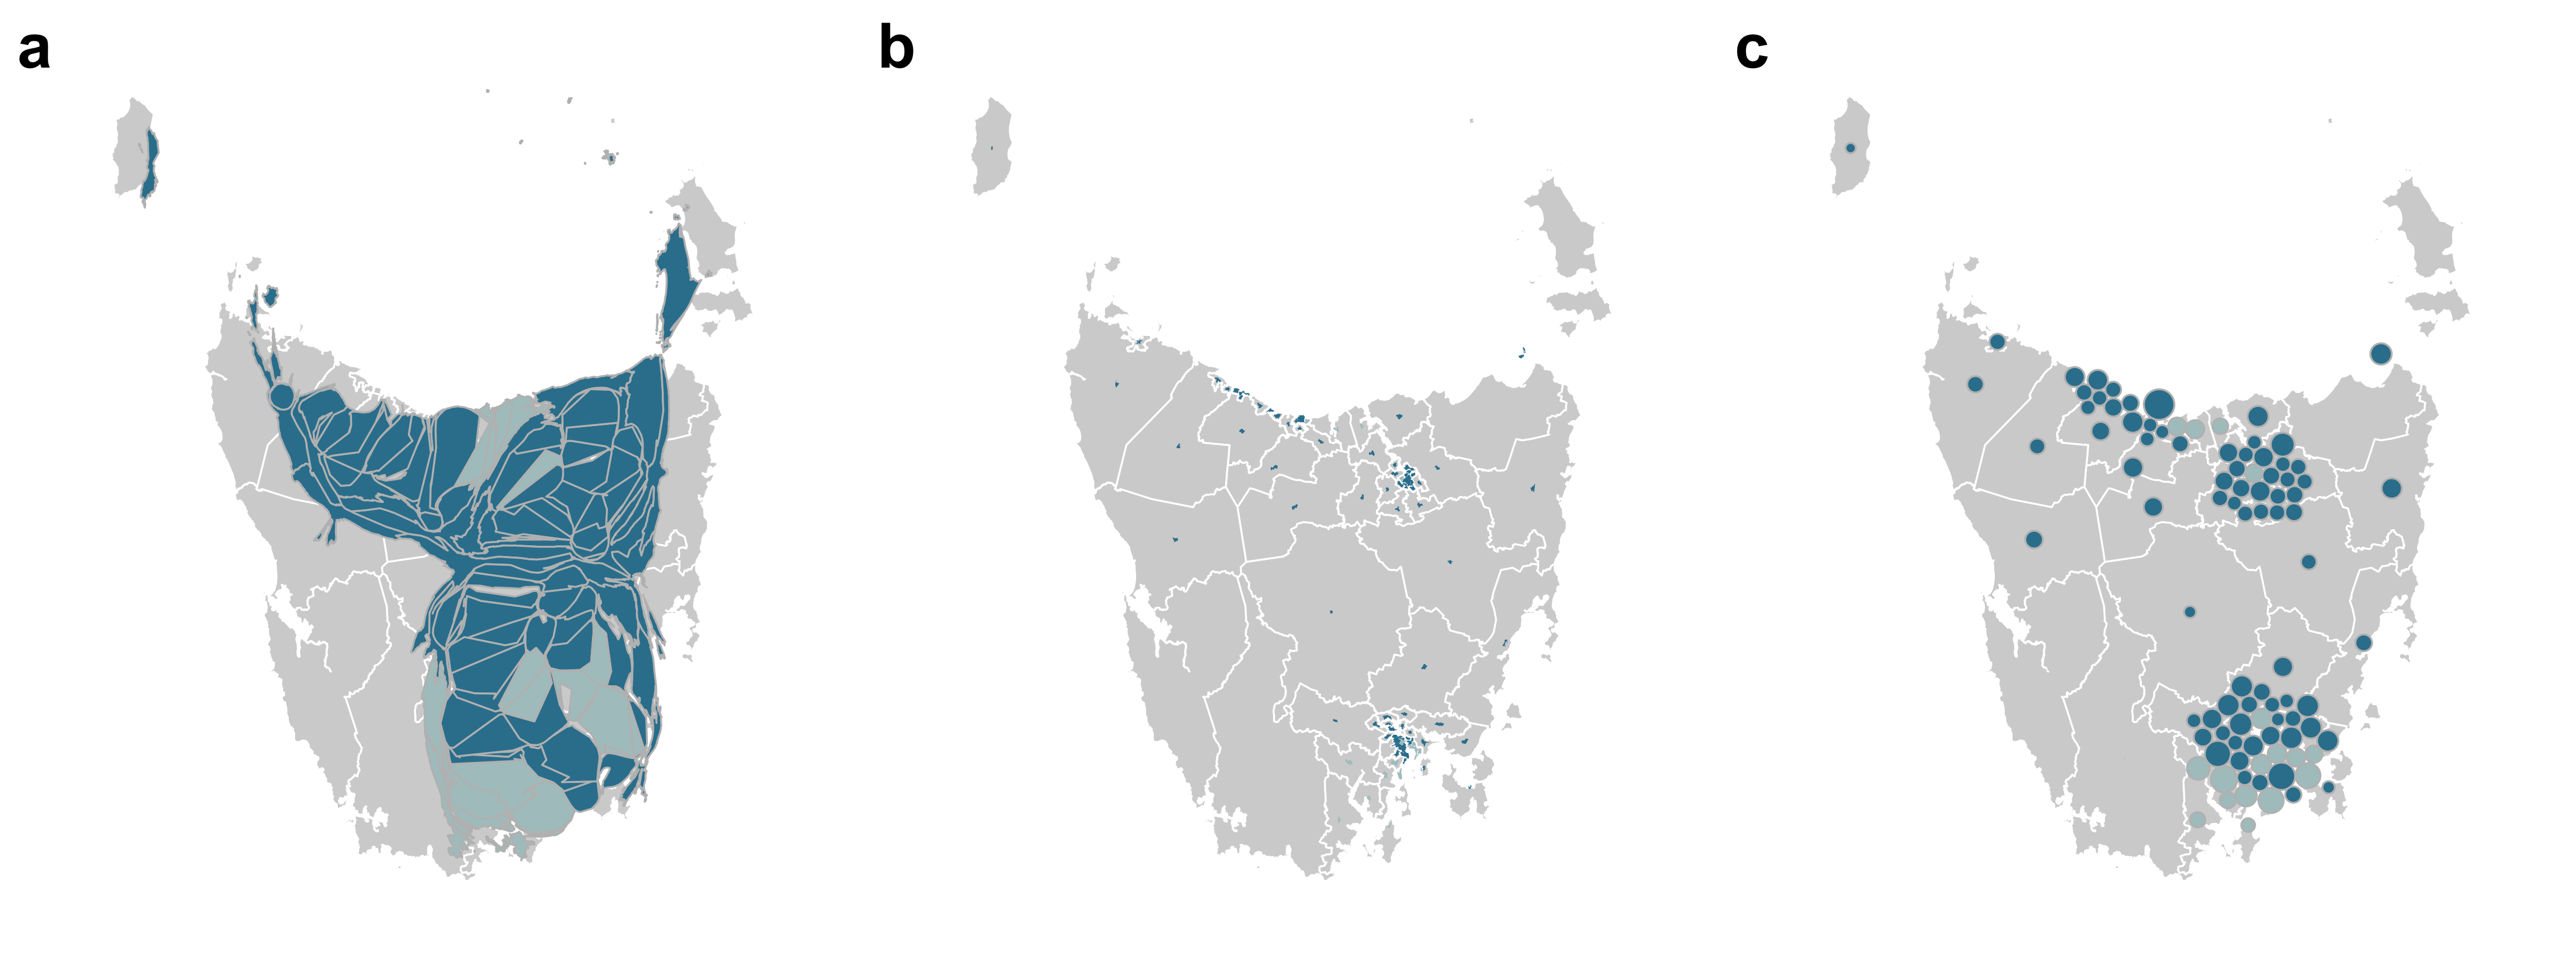 The three displays show alternative maps of the Australian state of Tasmania at SA2 level: (a) contiguous cartogram, (b) non-contiguous cartogram and (c) Dorling cartogram of Tasmania. The contiguous cartogram looks like the state has an hourglass figure, while the non-contiguous cartogram shrinks areas into invisibility. The Dorling expands the metropolitan regions.